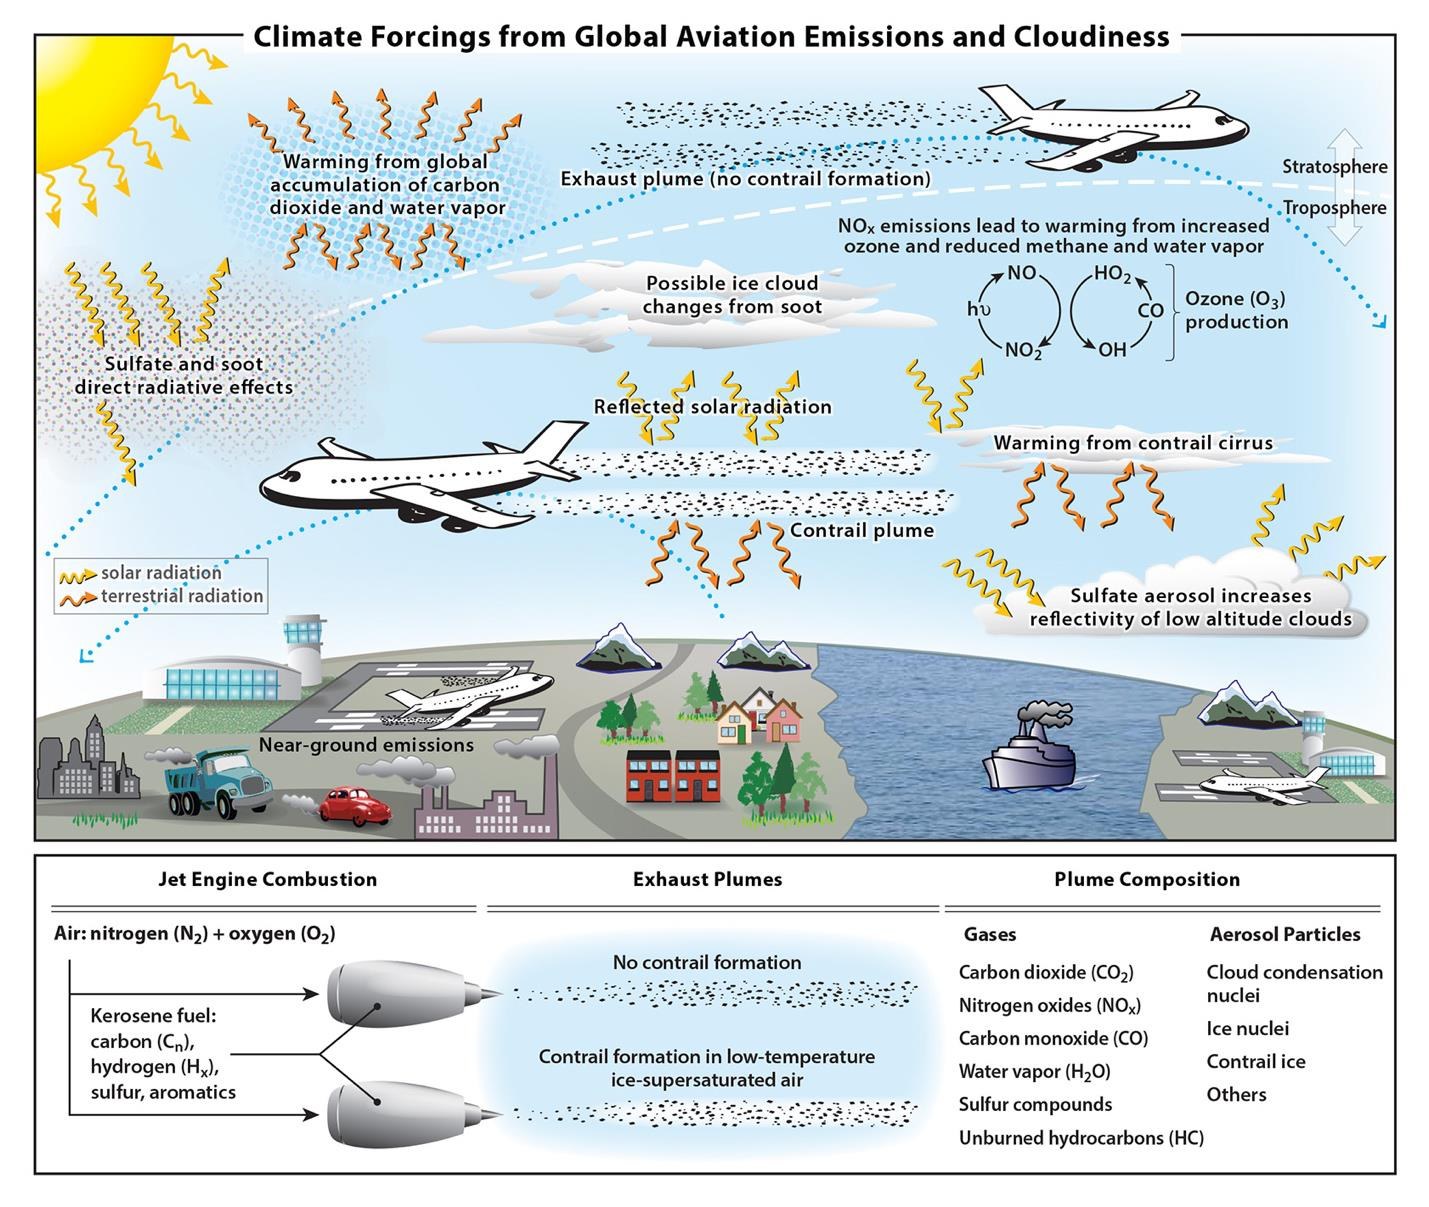 Schematic overview of the processes by which air transport emissions and contrail cirrus clouds influence the climate system